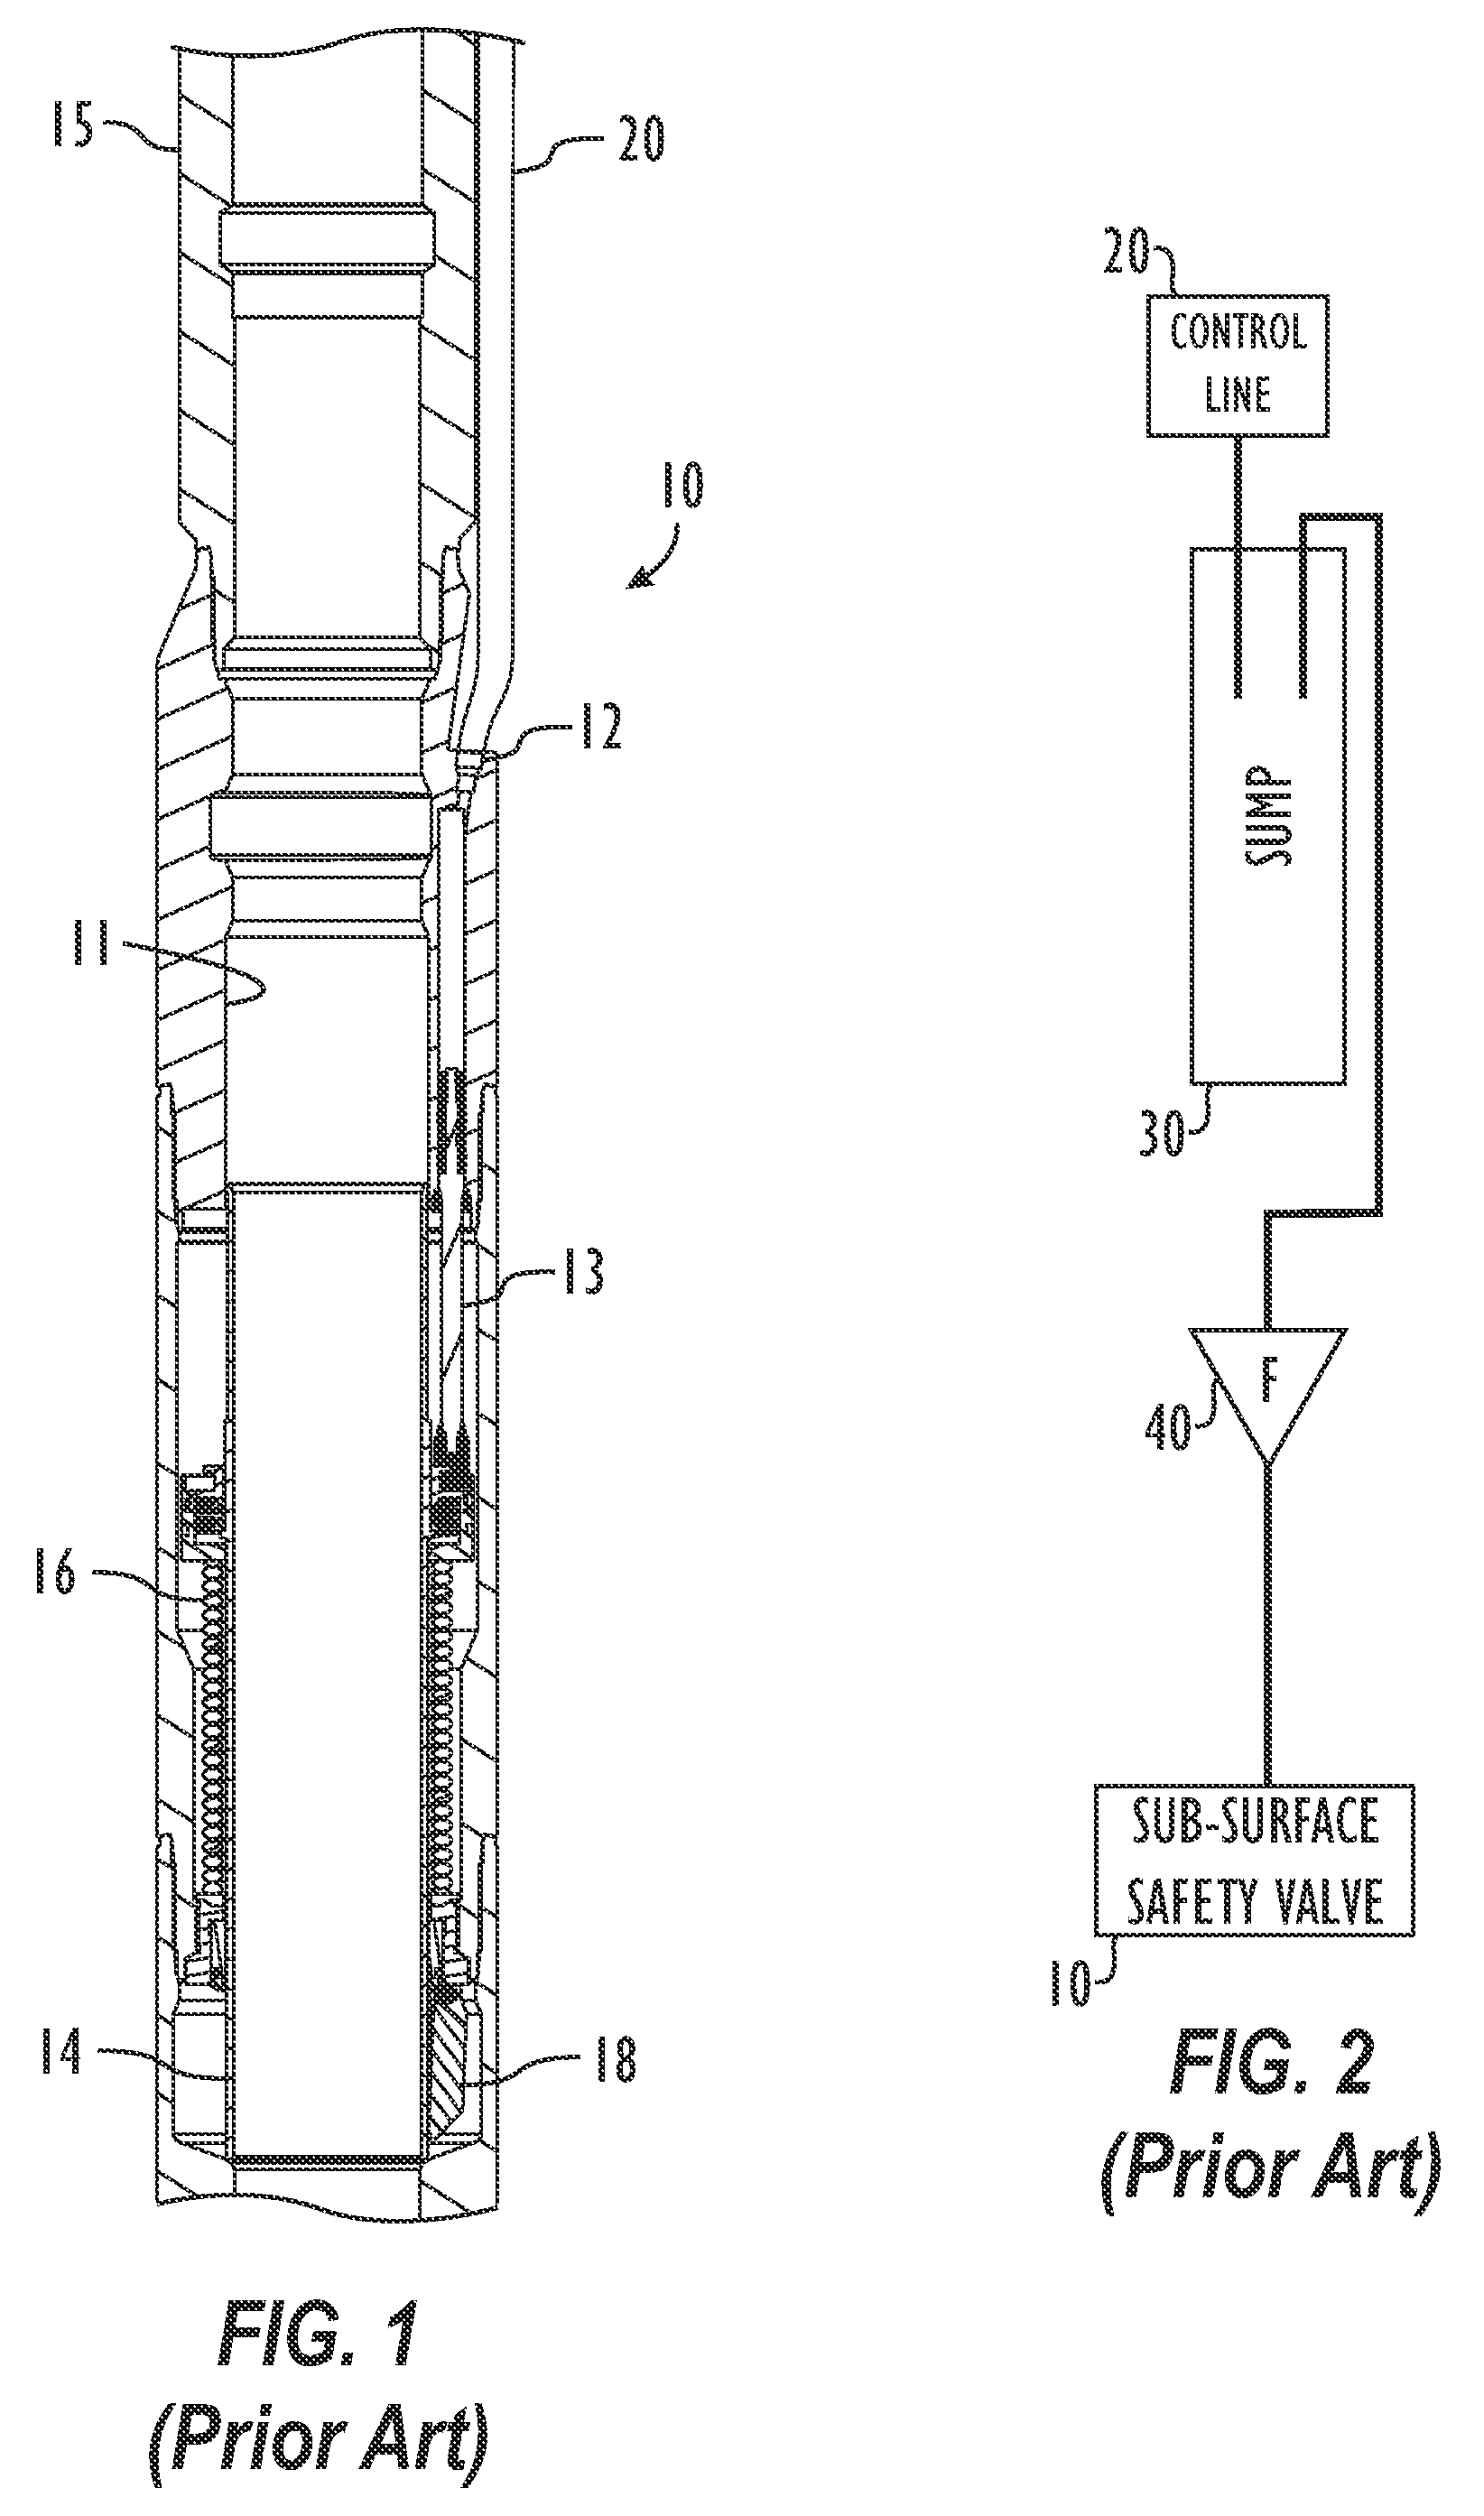 Dual control line system and method for operating surface controlled sub-surface safety valve in a well